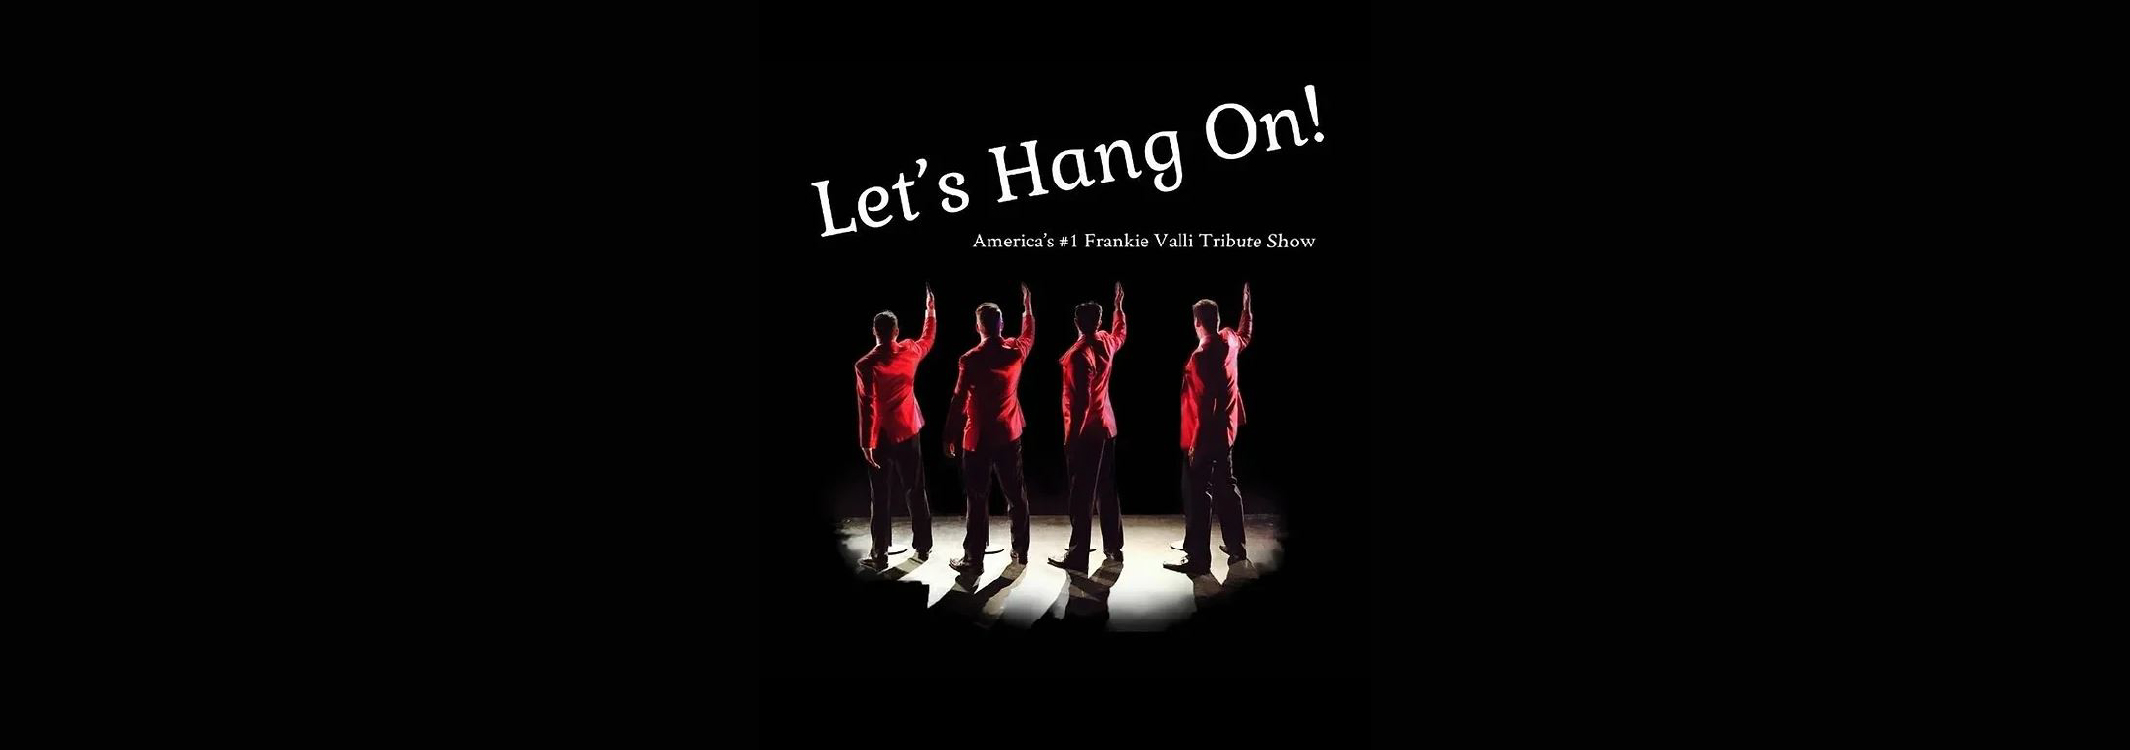 Let’s Hang On: Frankie Valli and The Four Seasons Tribute